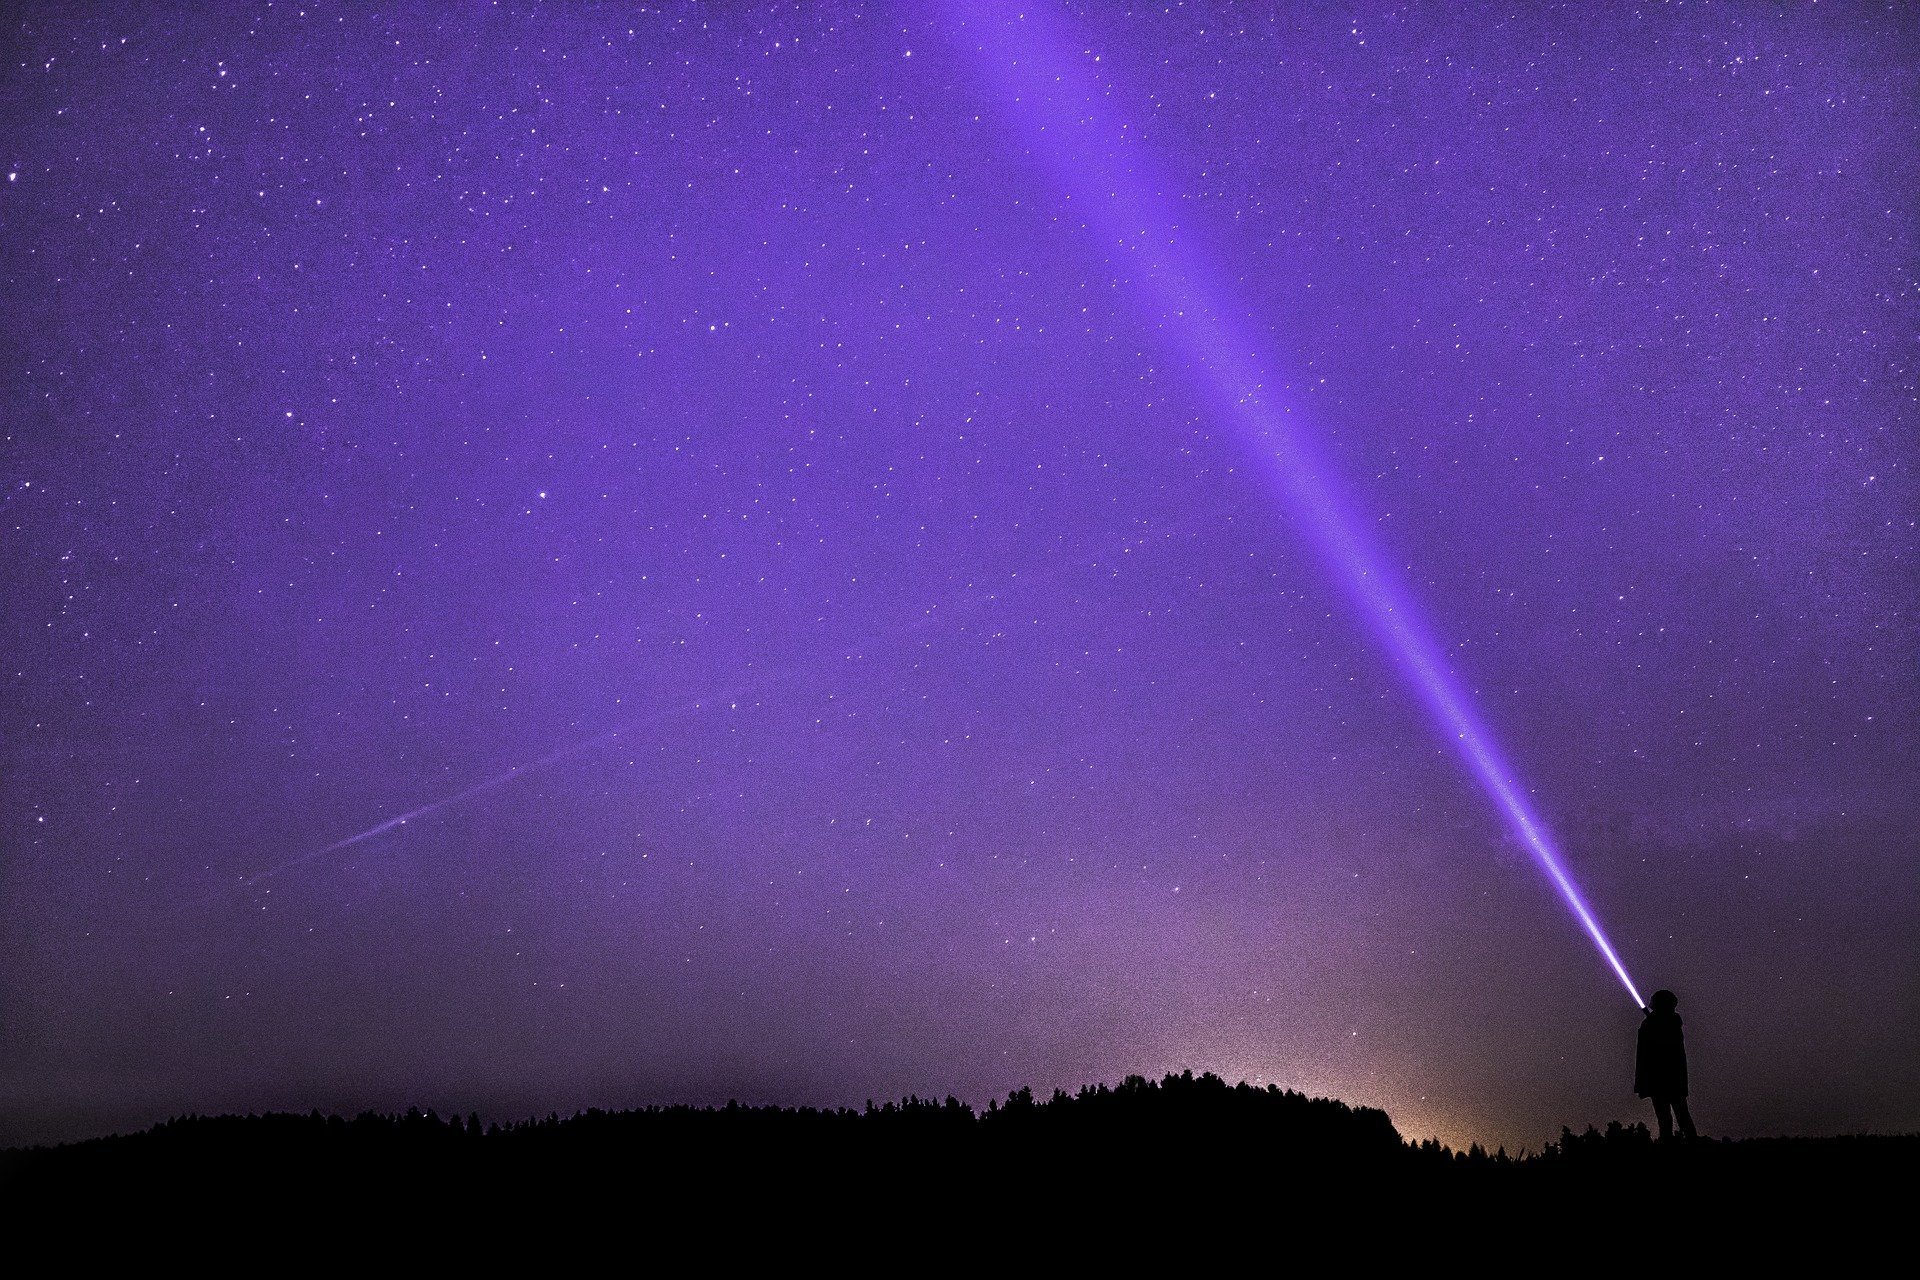 laser pointers of any color can be used outdoors to look at the stars. The one here is violet or blue.